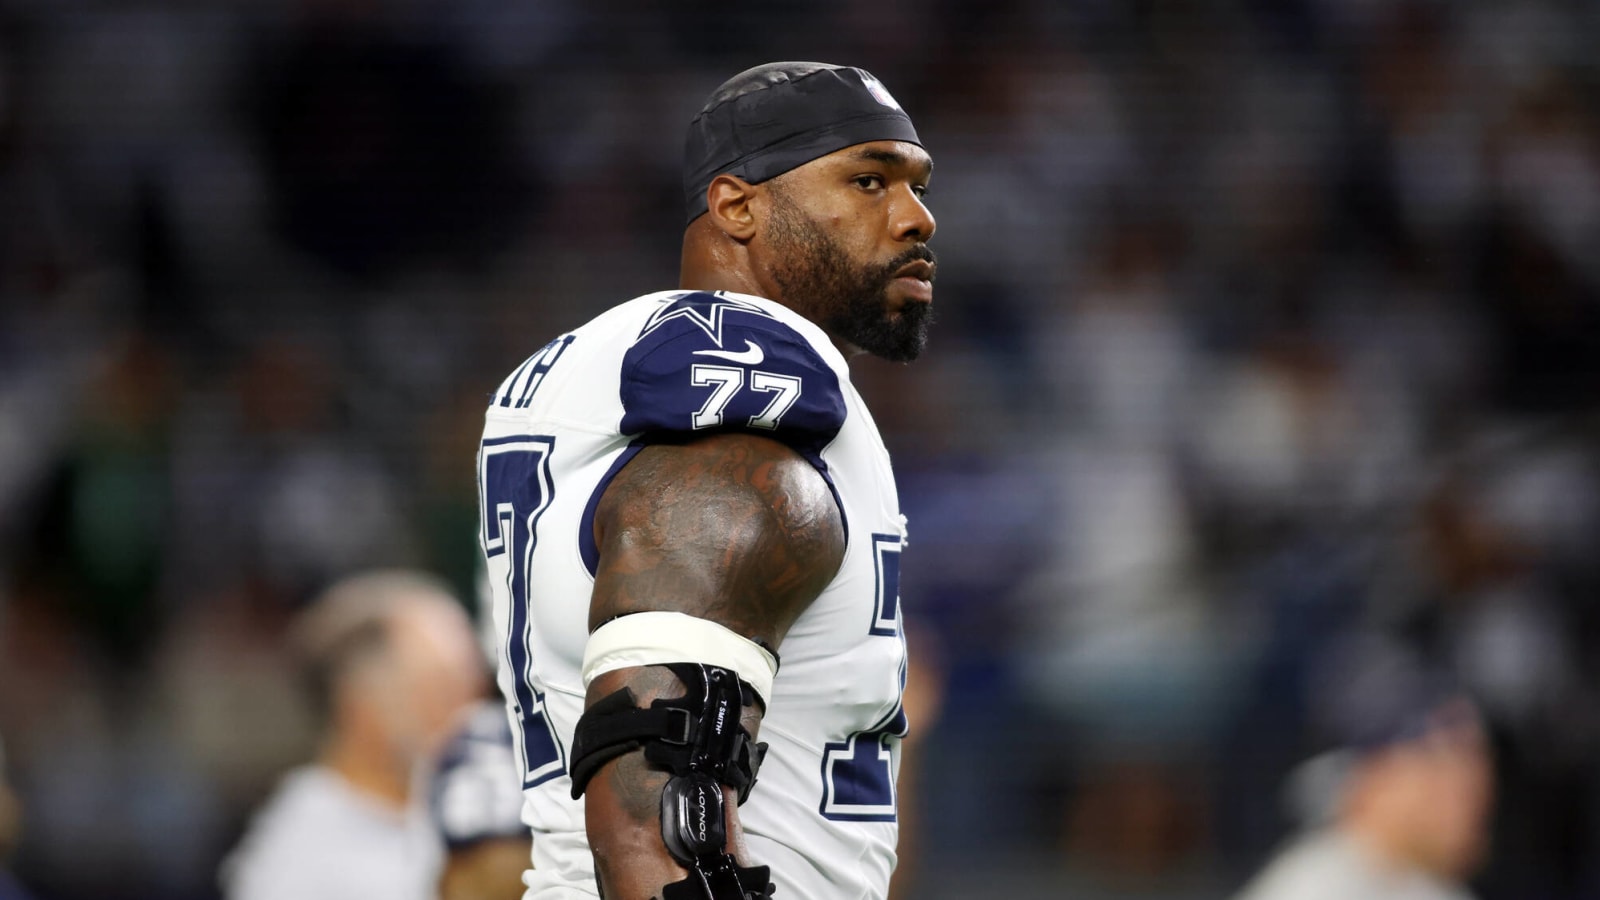 Veteran offensive lineman wants to remain with Cowboys